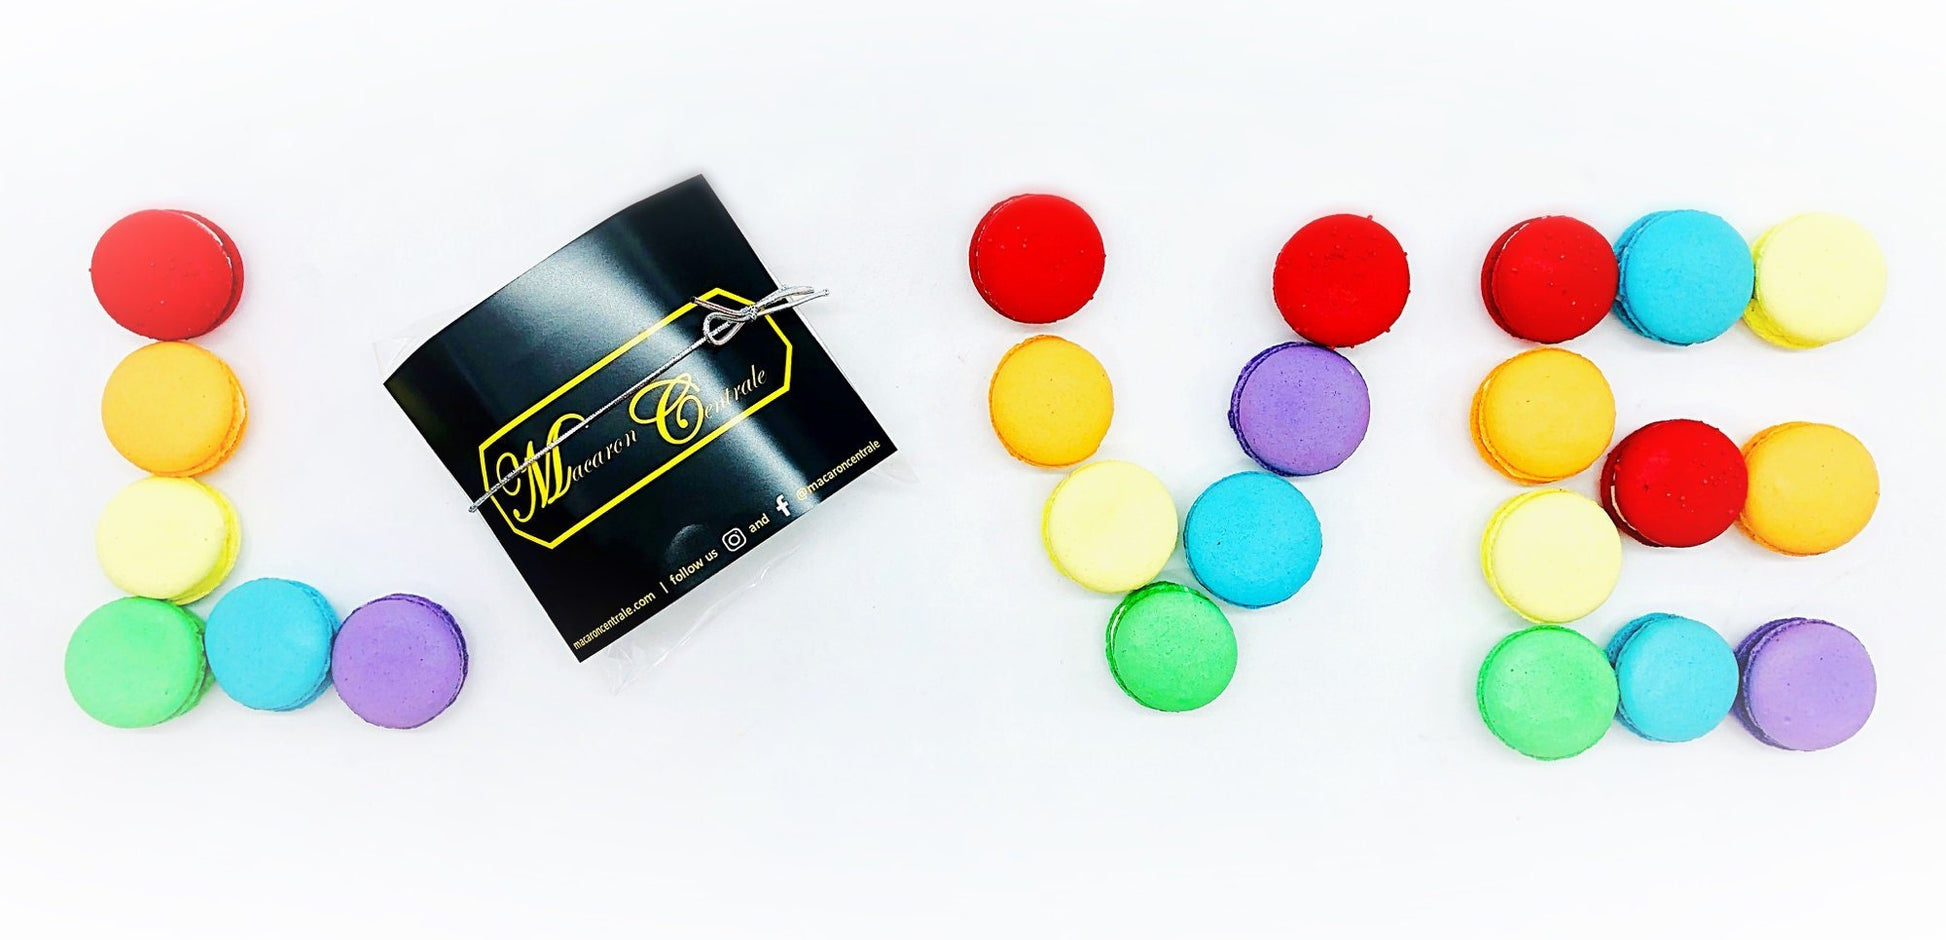 Love is Love V.1 | French Macaron Value Pack | Pride Macarons Available in 6 or 12 Pack - Macaron Centrale6 Pack